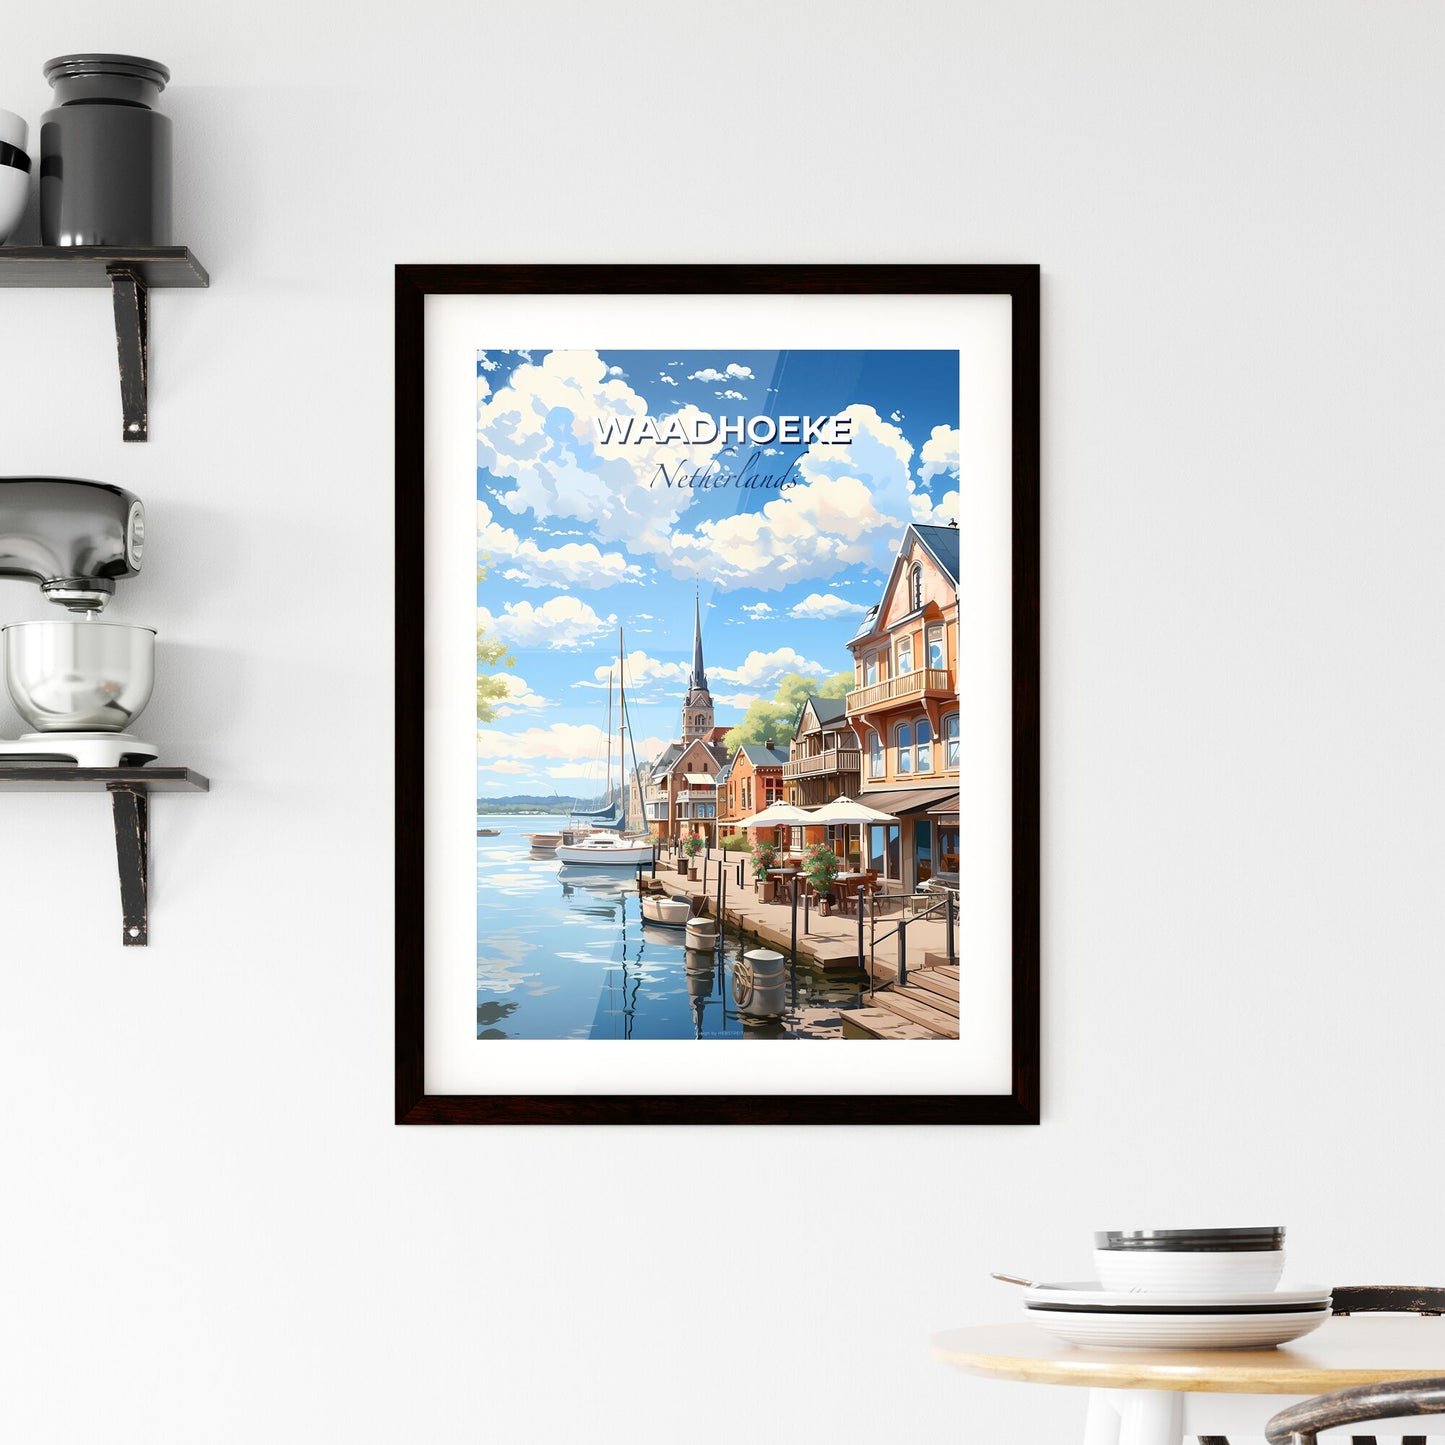 Waadhoeke, Netherlands, A Poster of a water way with buildings and boats Default Title